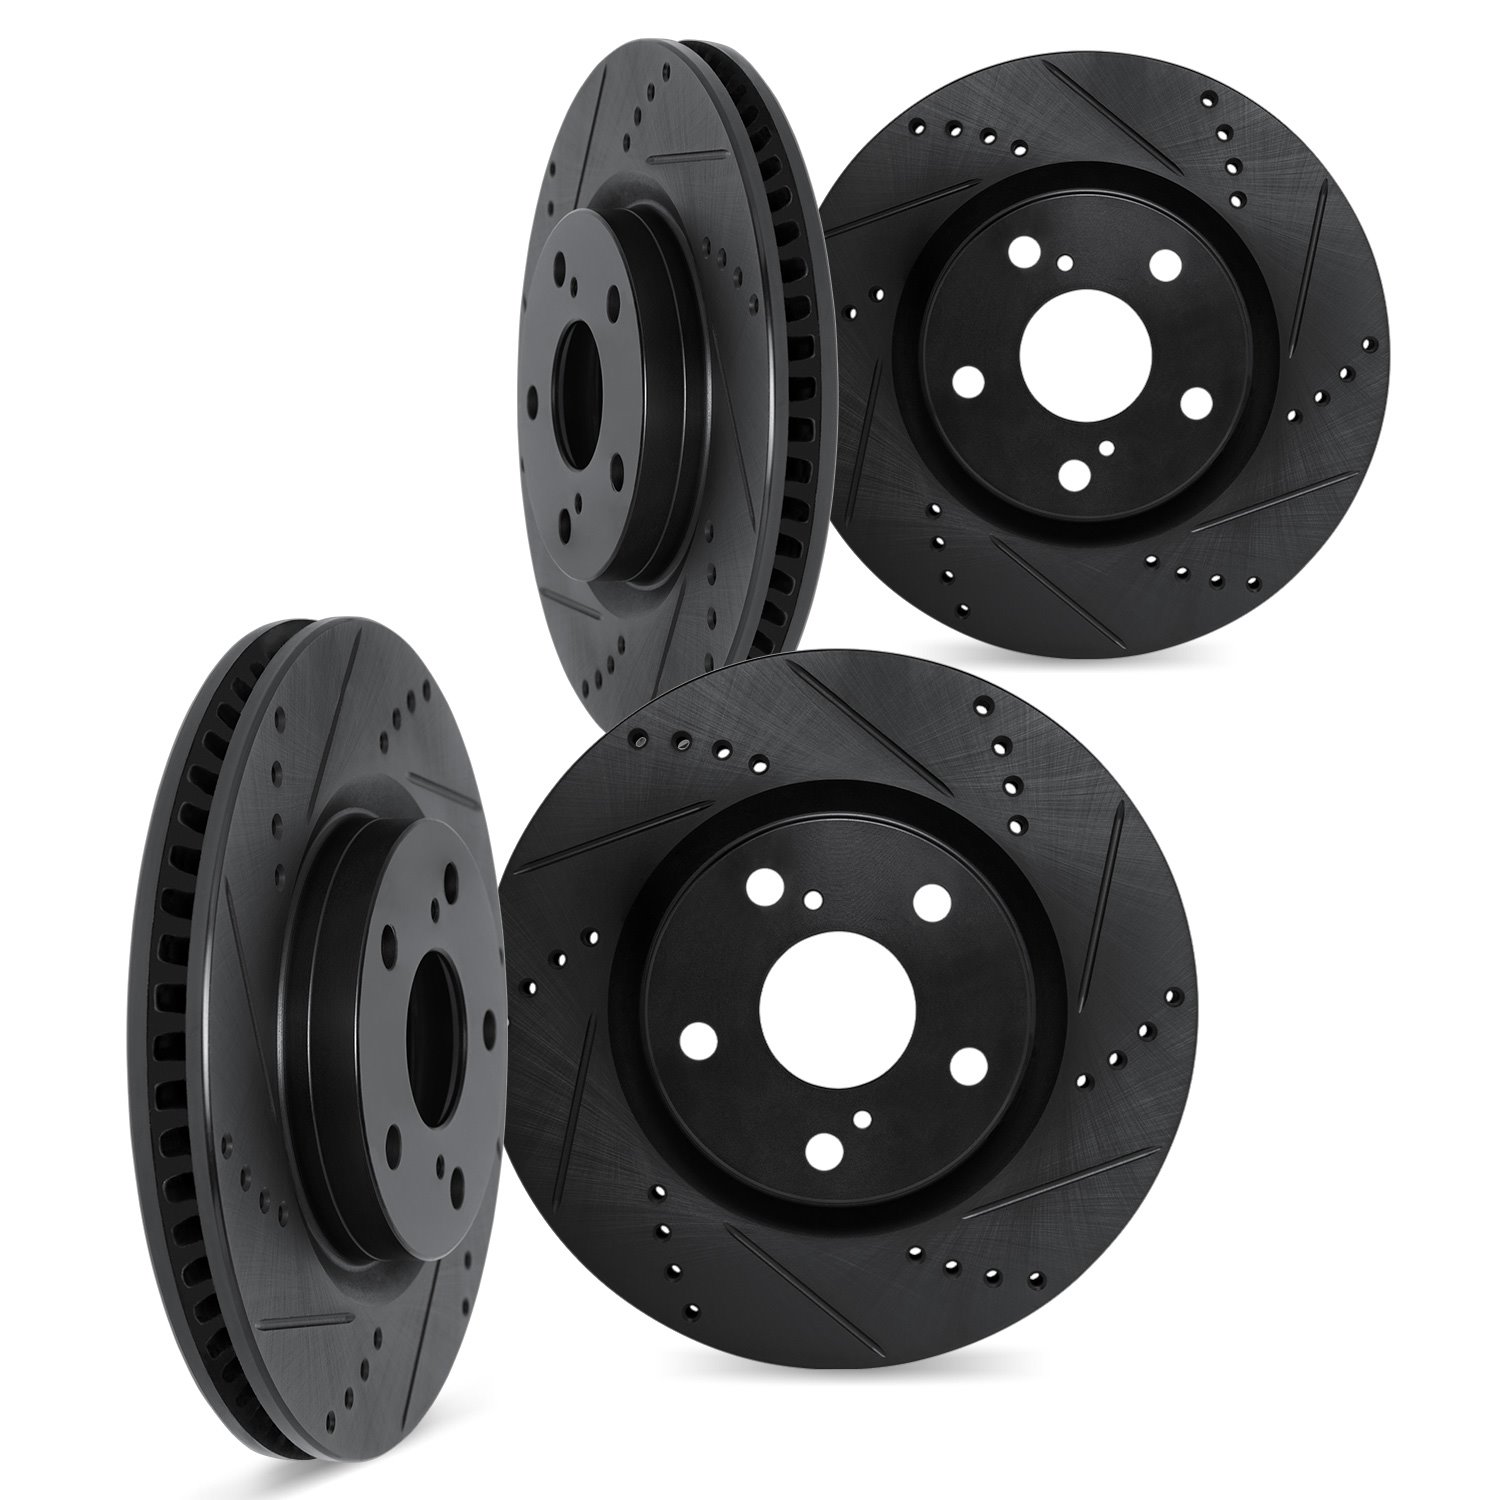 8004-73053 Drilled/Slotted Brake Rotors [Black], 2004-2005 Audi/Volkswagen, Position: Front and Rear